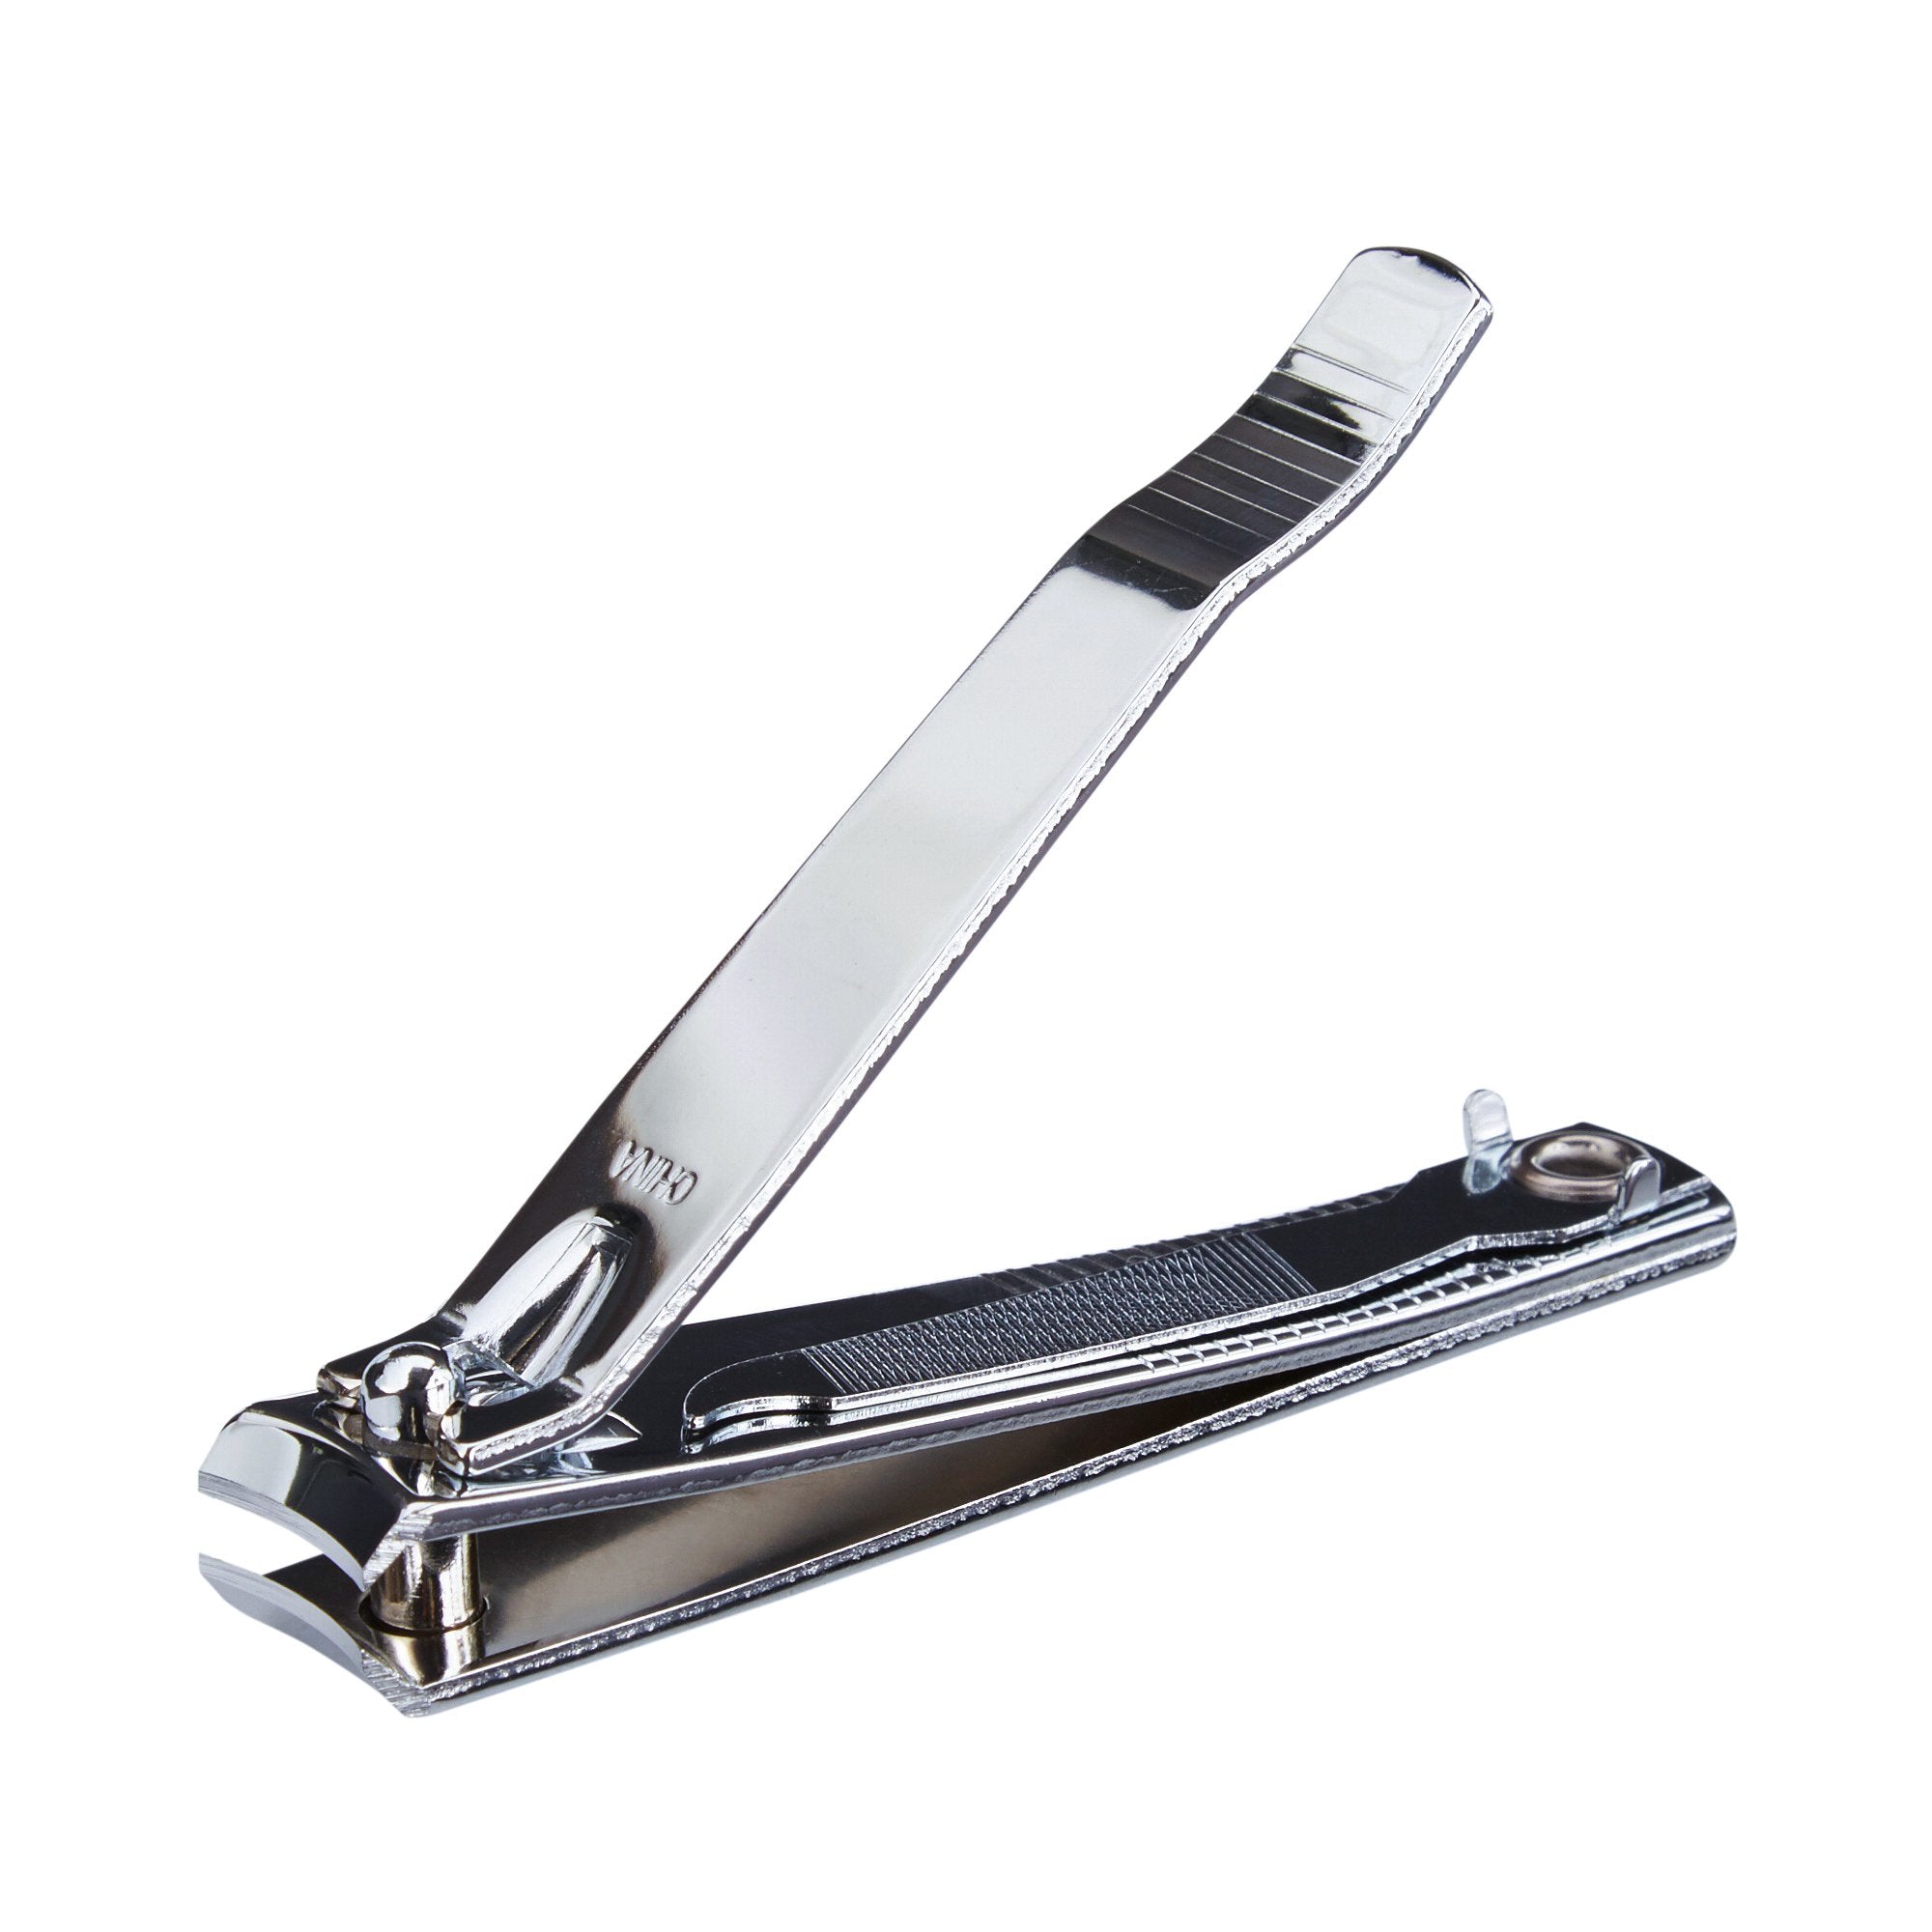 Toenail Clippers McKesson Thumb Squeeze Lever